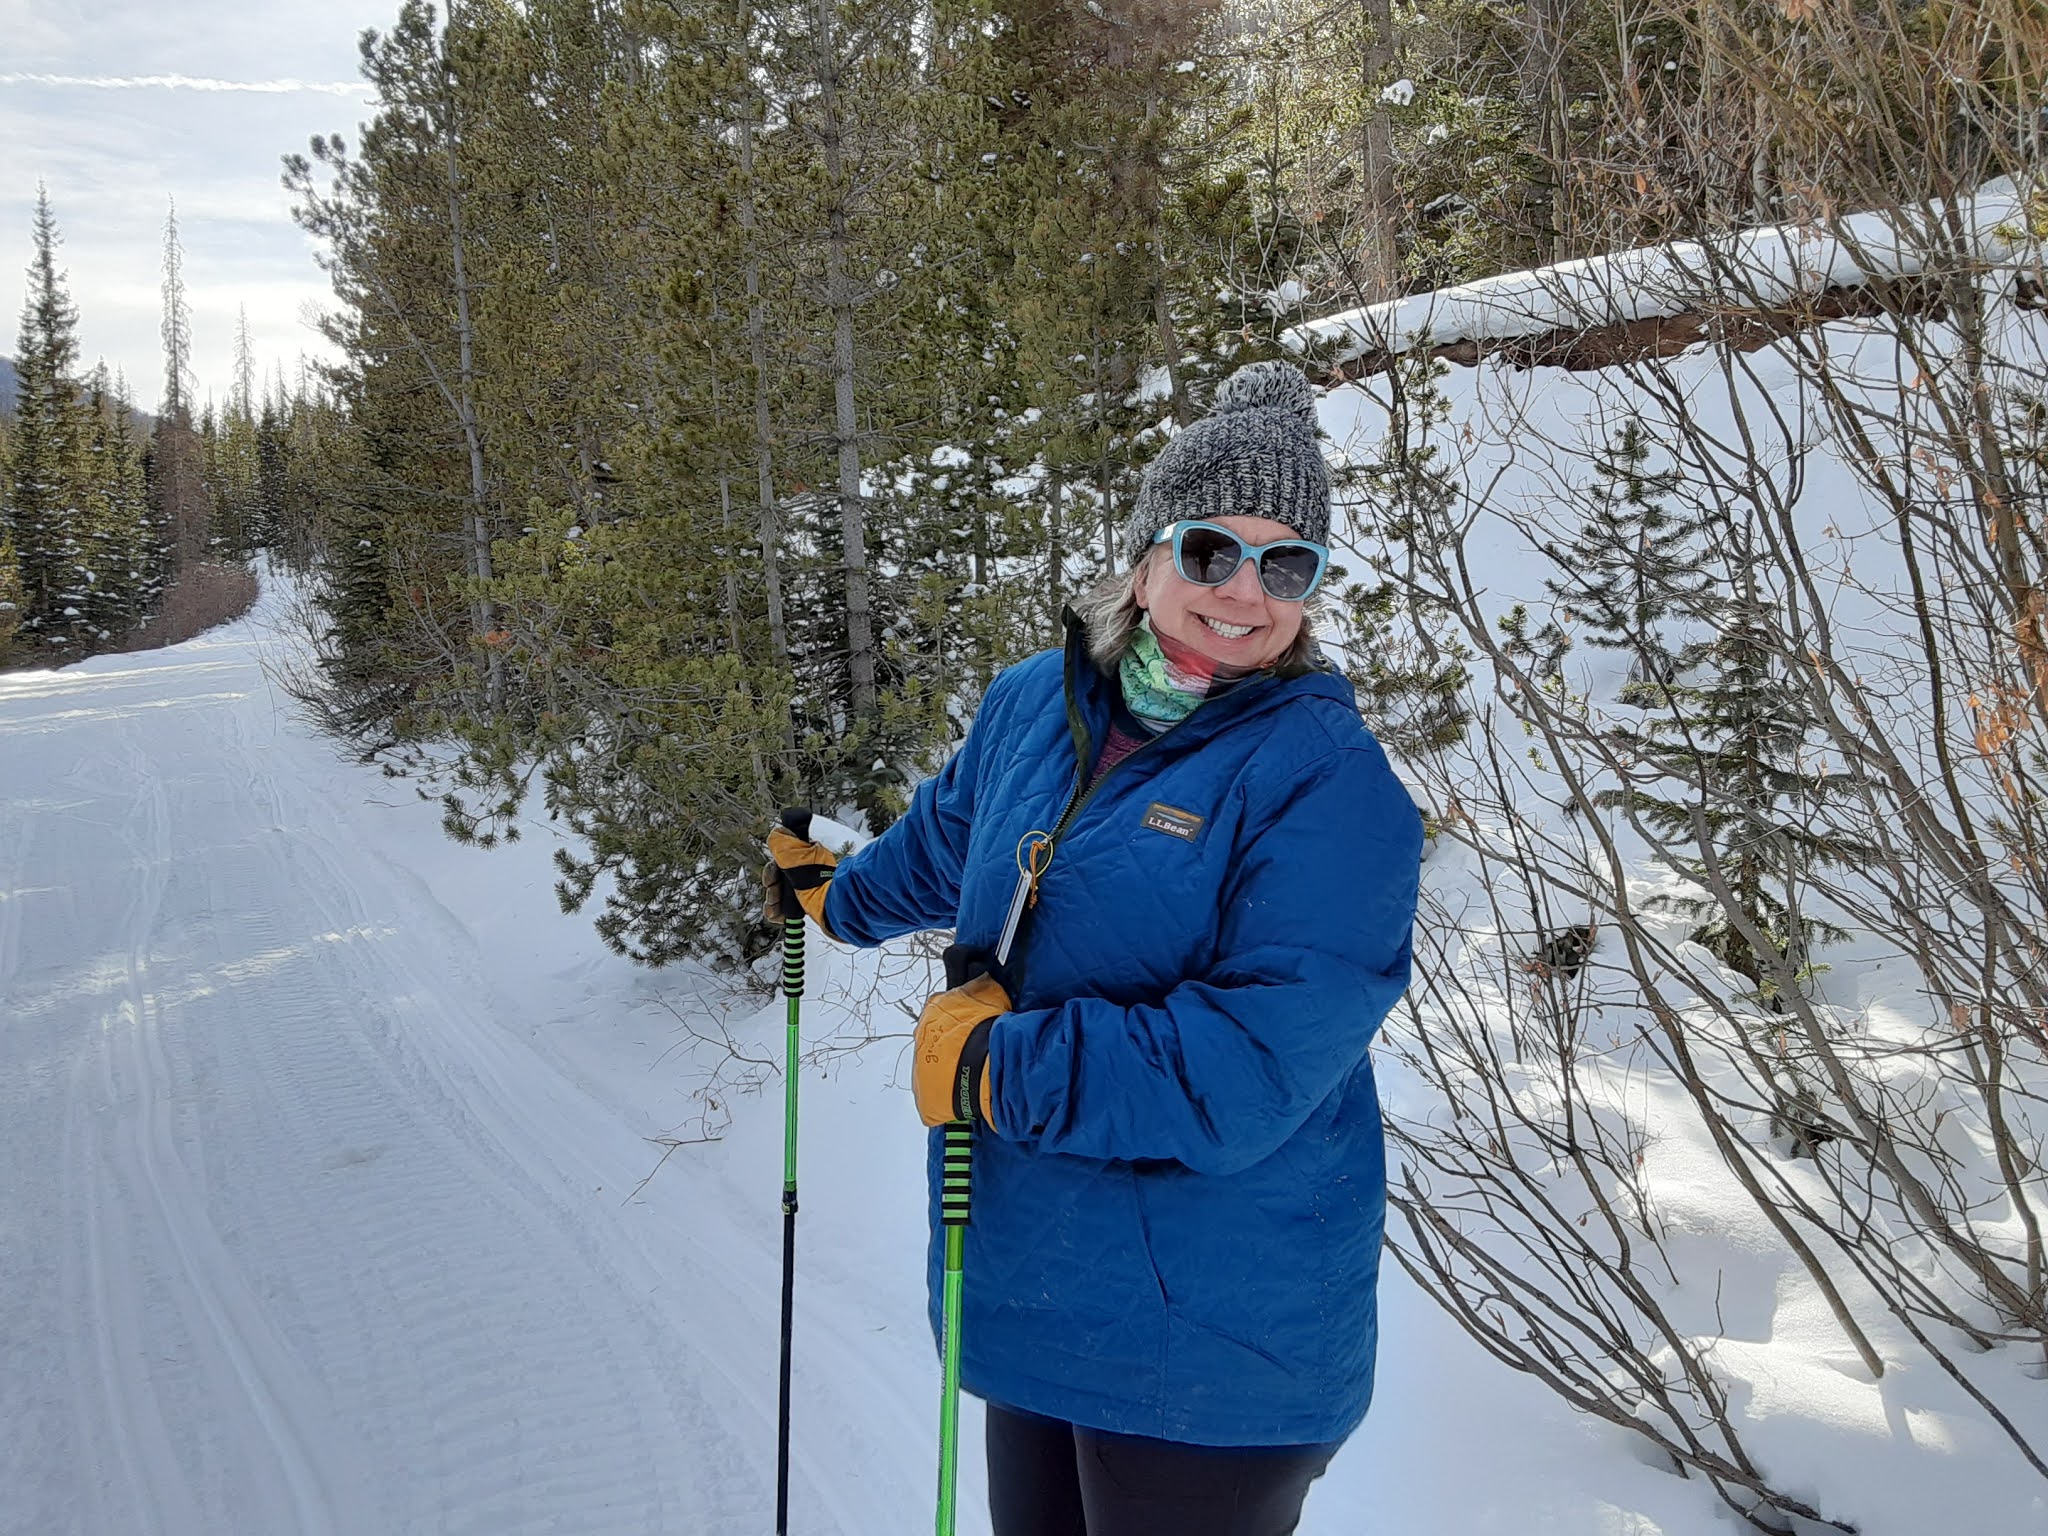 Exterior winter, lady smiling on cross country skis